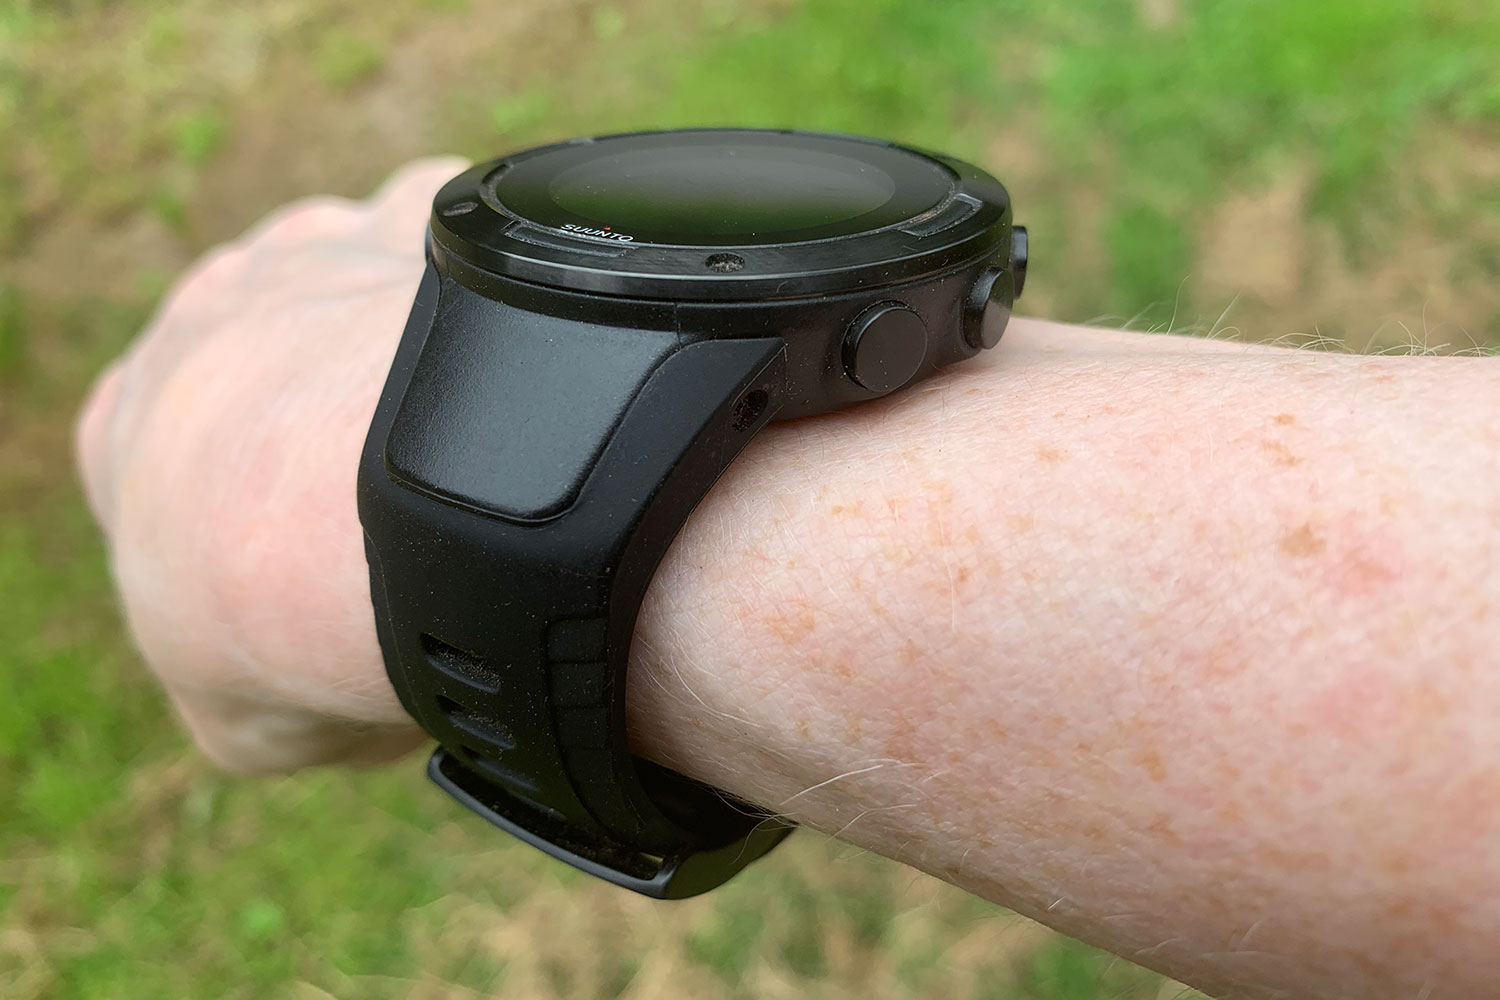 Suunto 5 Sports Watch Review: The Display Can't Keep Up The Pace